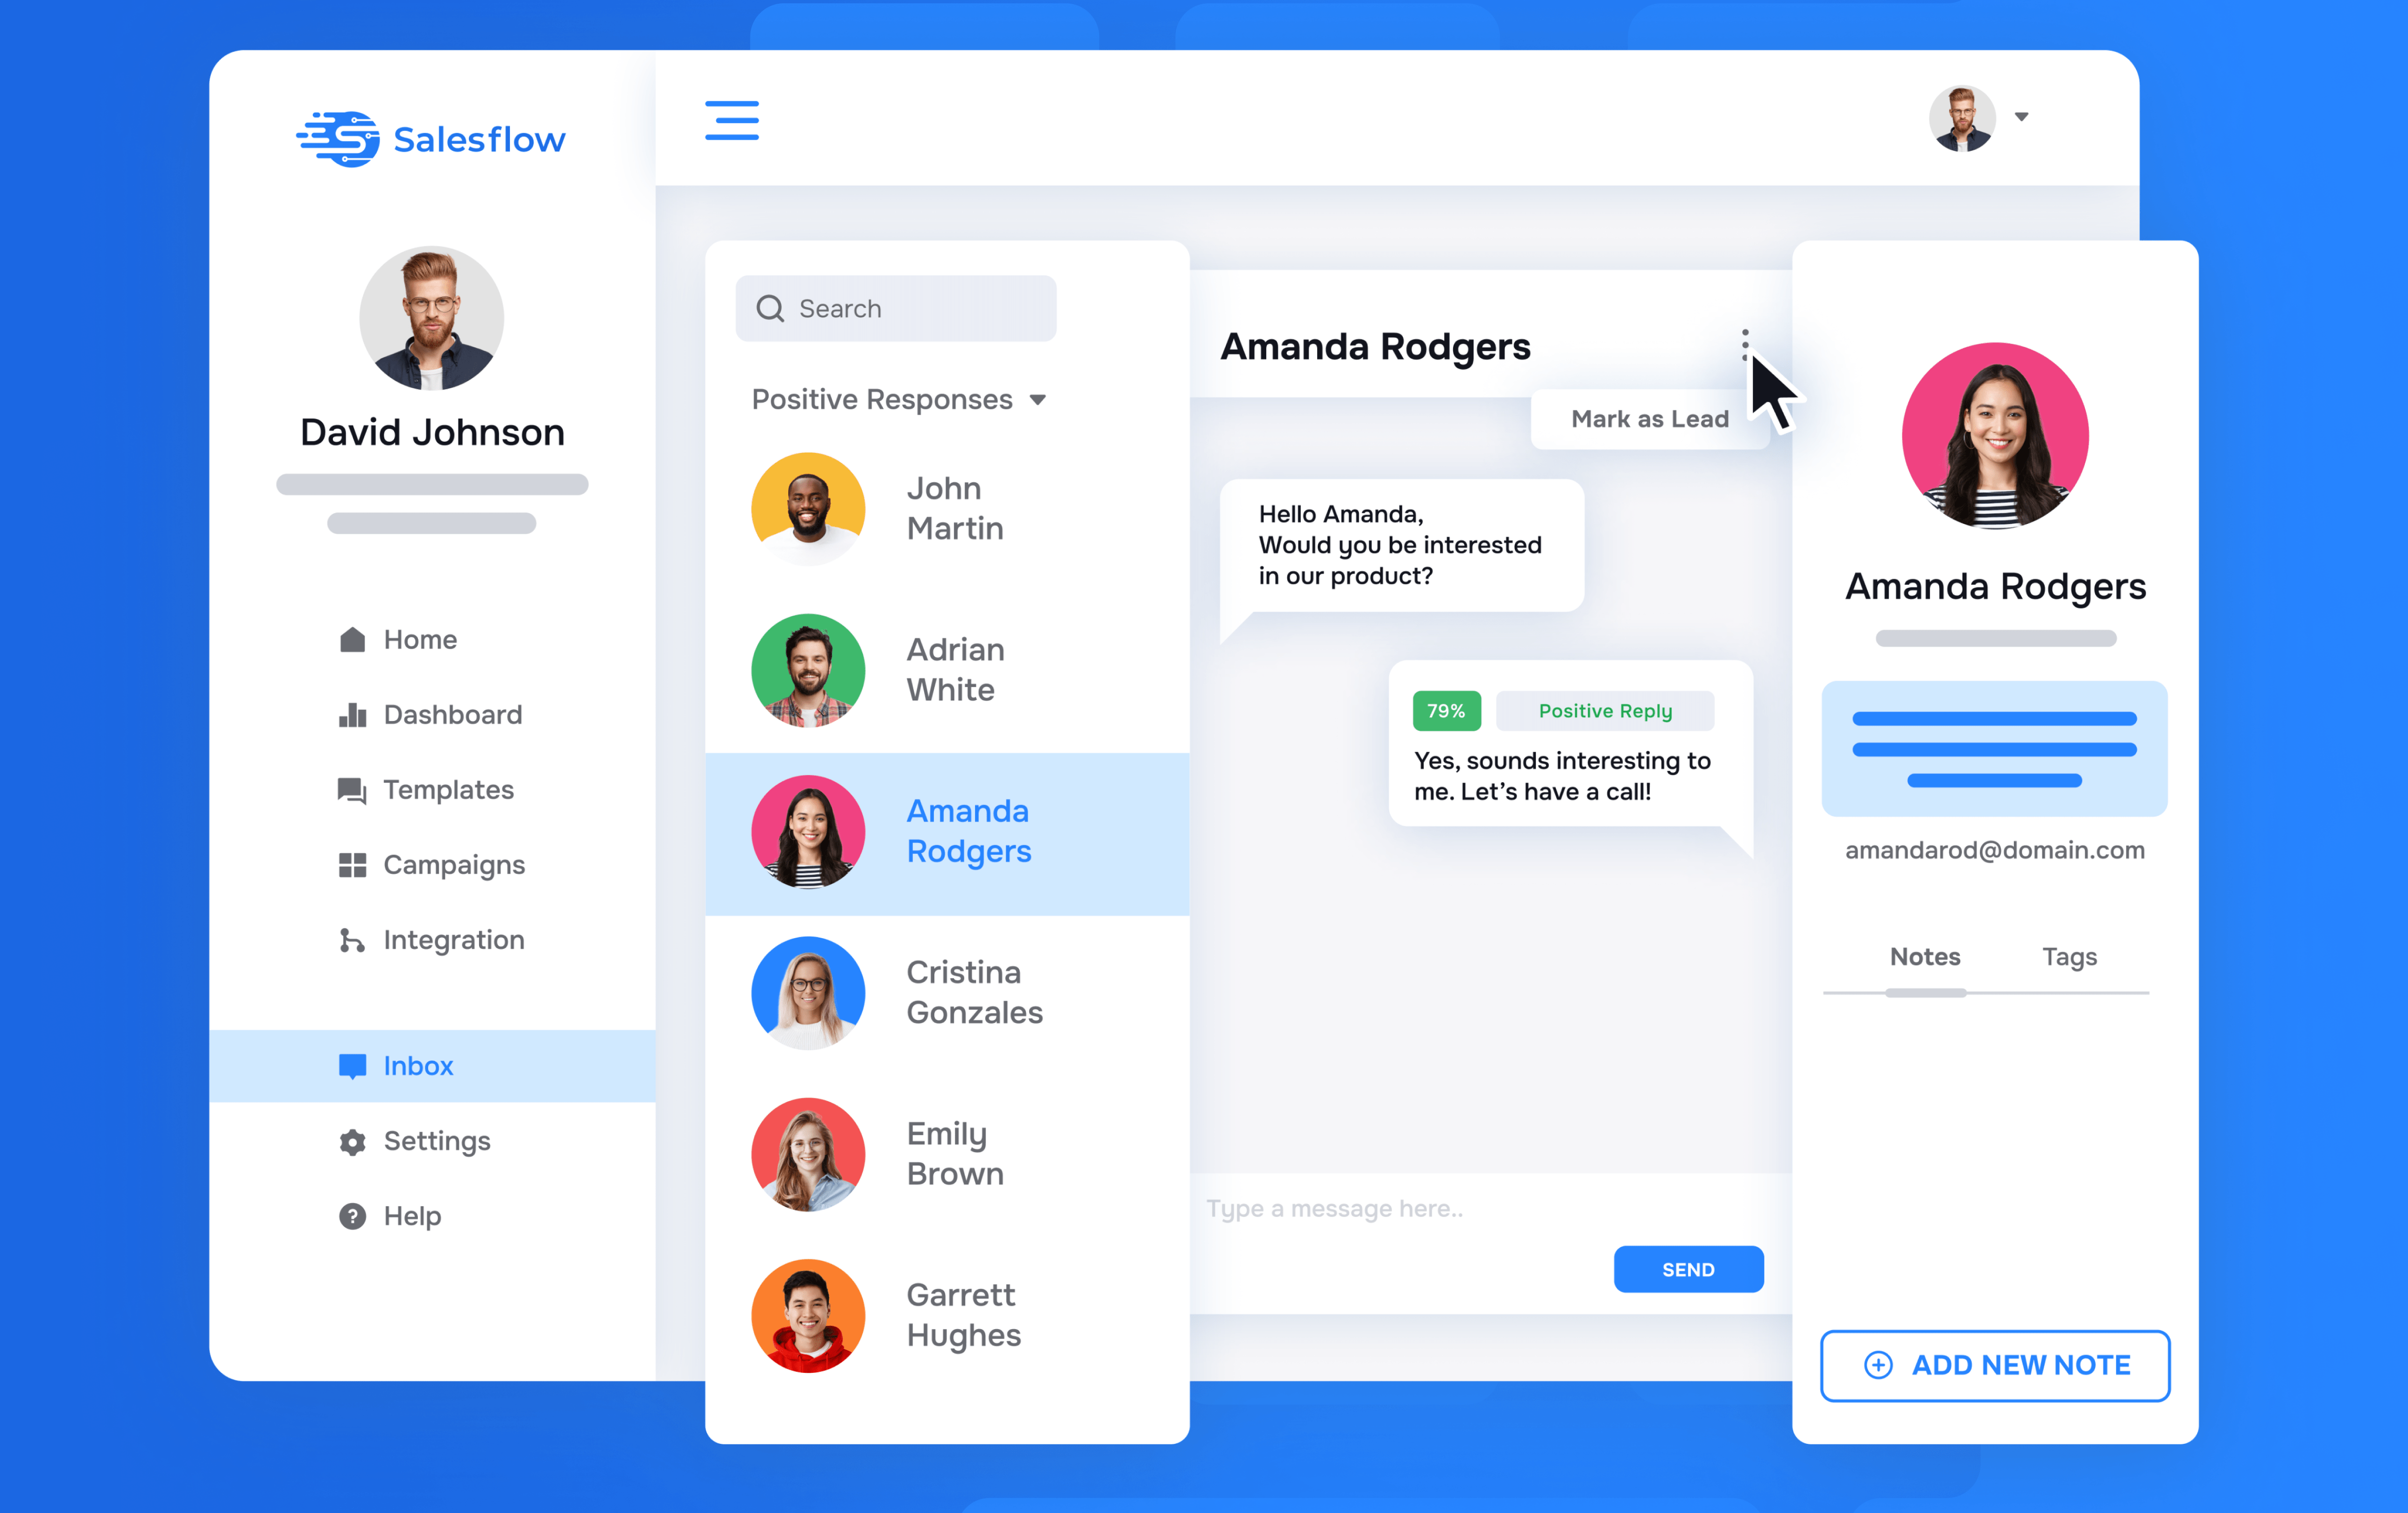 Salesflow Software - Smart & customisable inbox & chat. The convenience of managing all your LinkedIn automation from one place. AI reply detection, advanced filters, tags. No need to check your LinkedIn inbox!